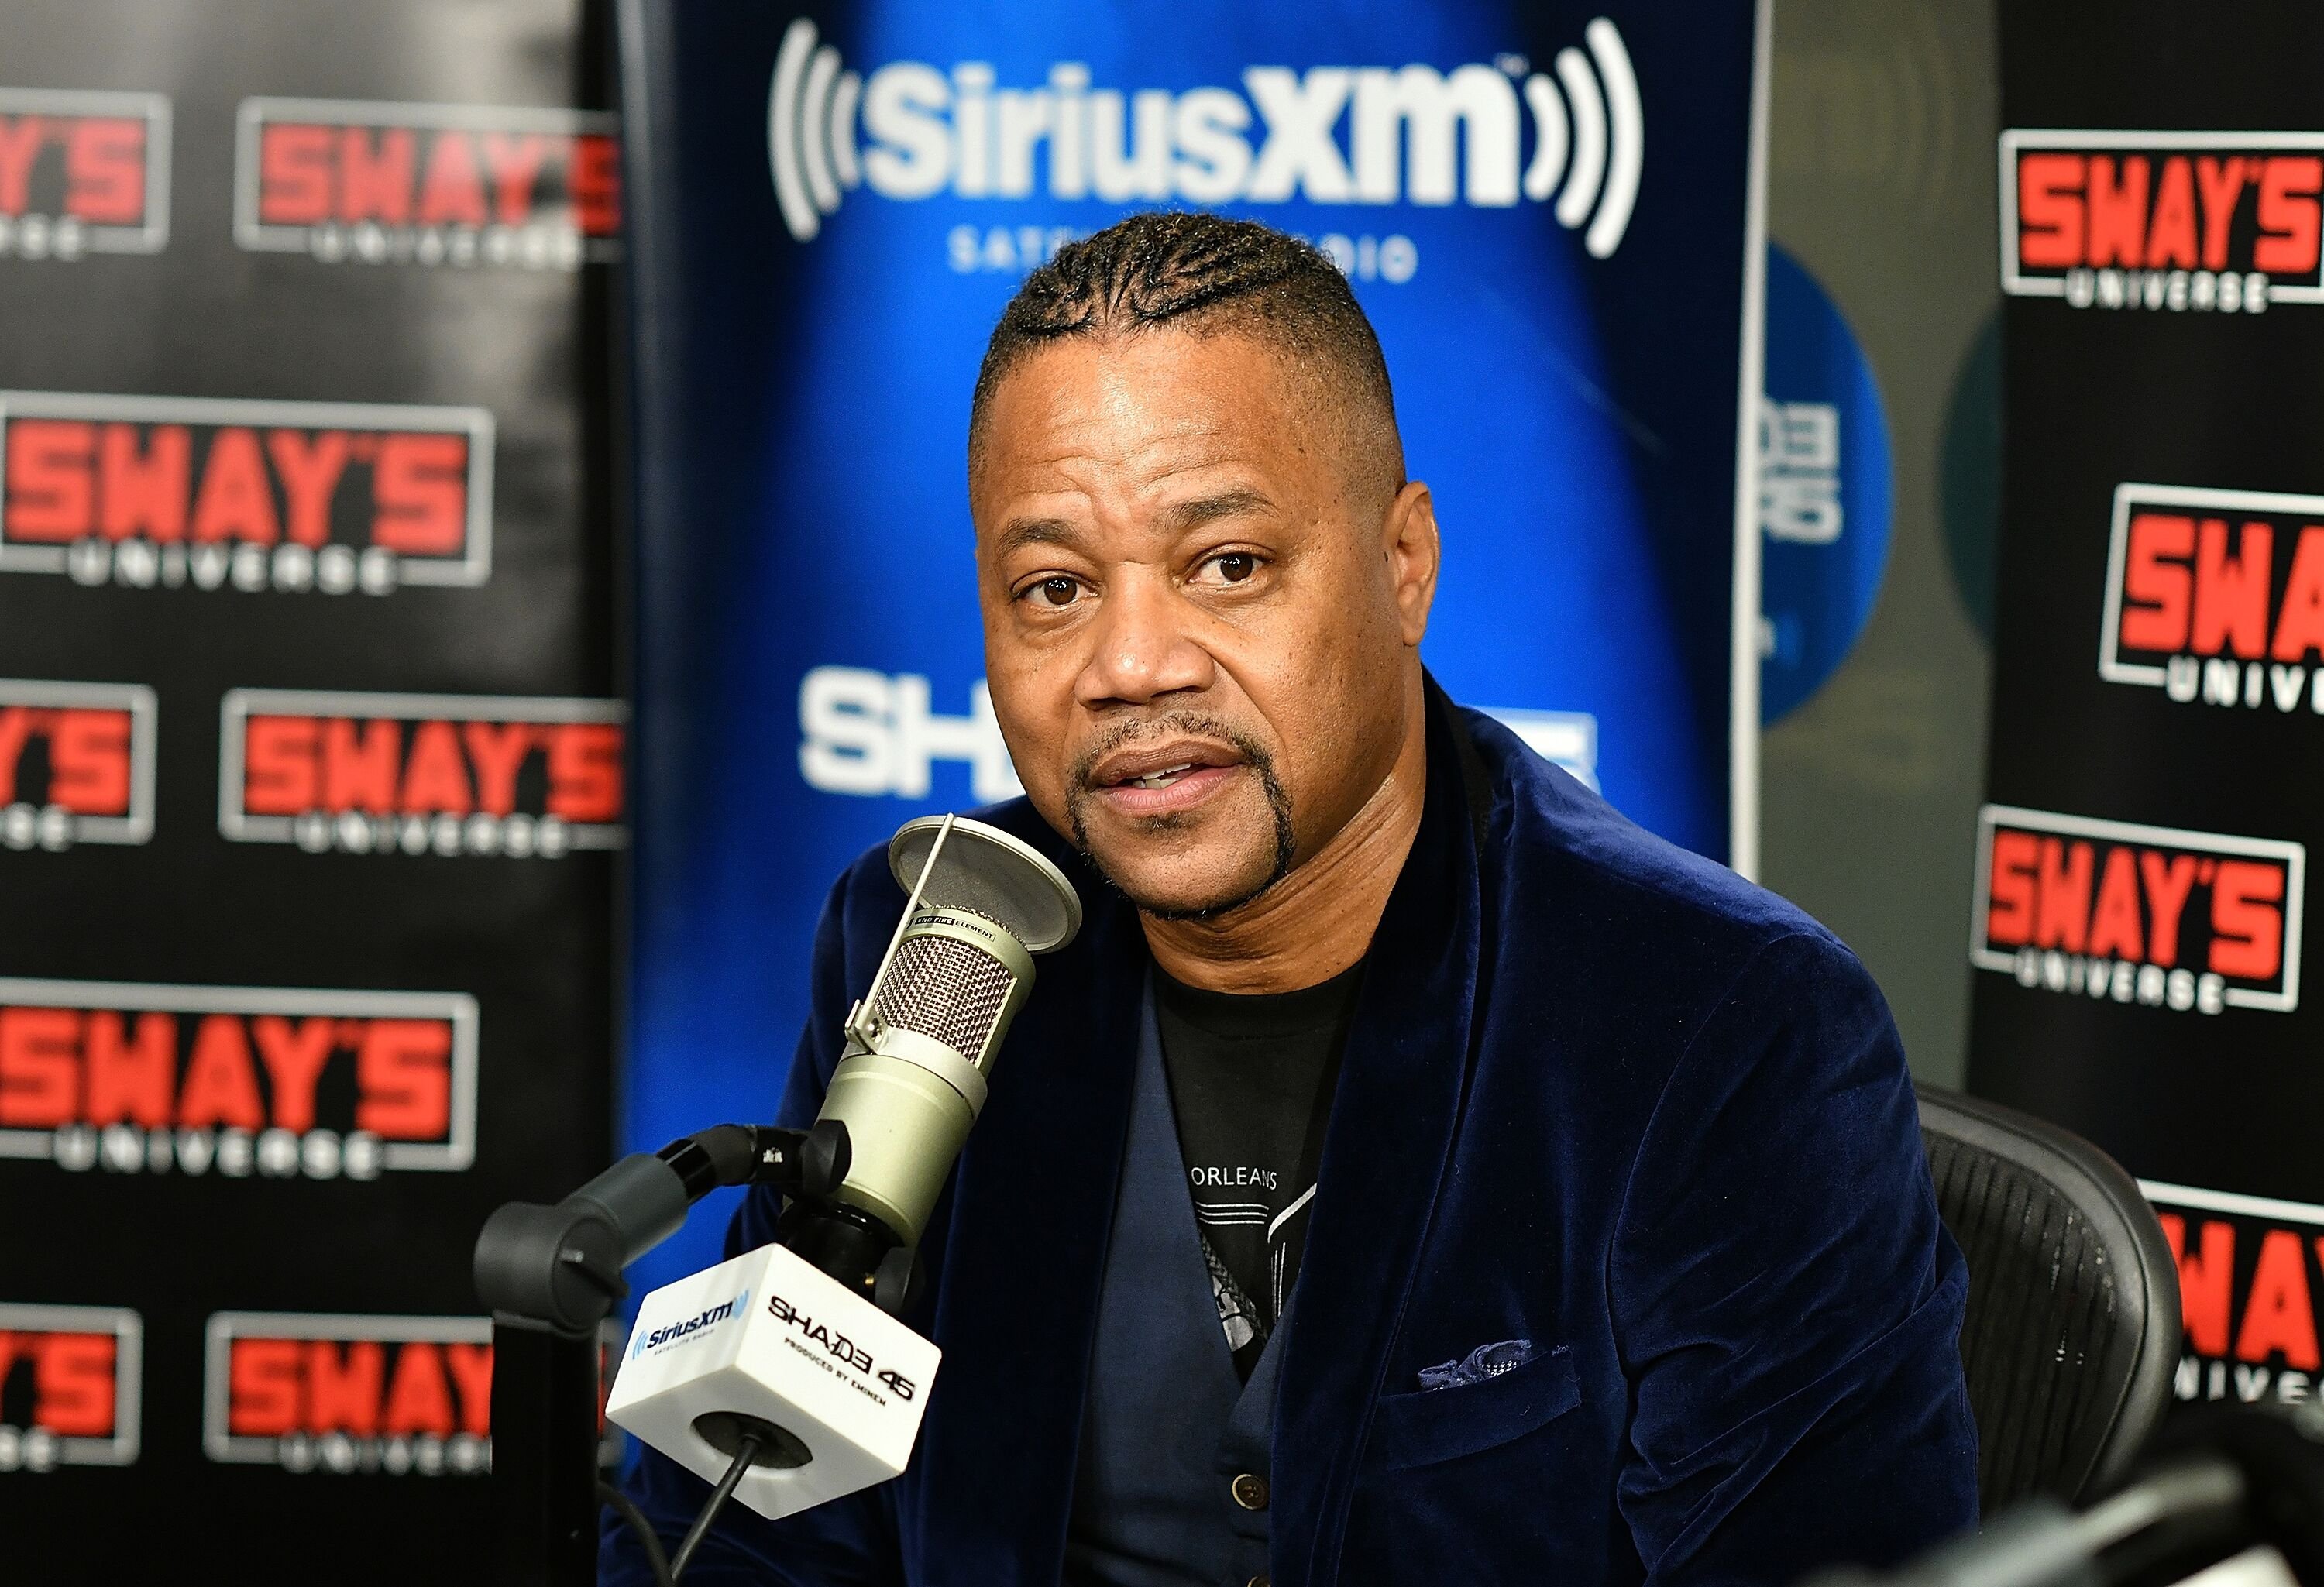 Cuba Gooding Jr. at a Sirius XM guesting | Source: Getty Images/GlobalImagesUkraine